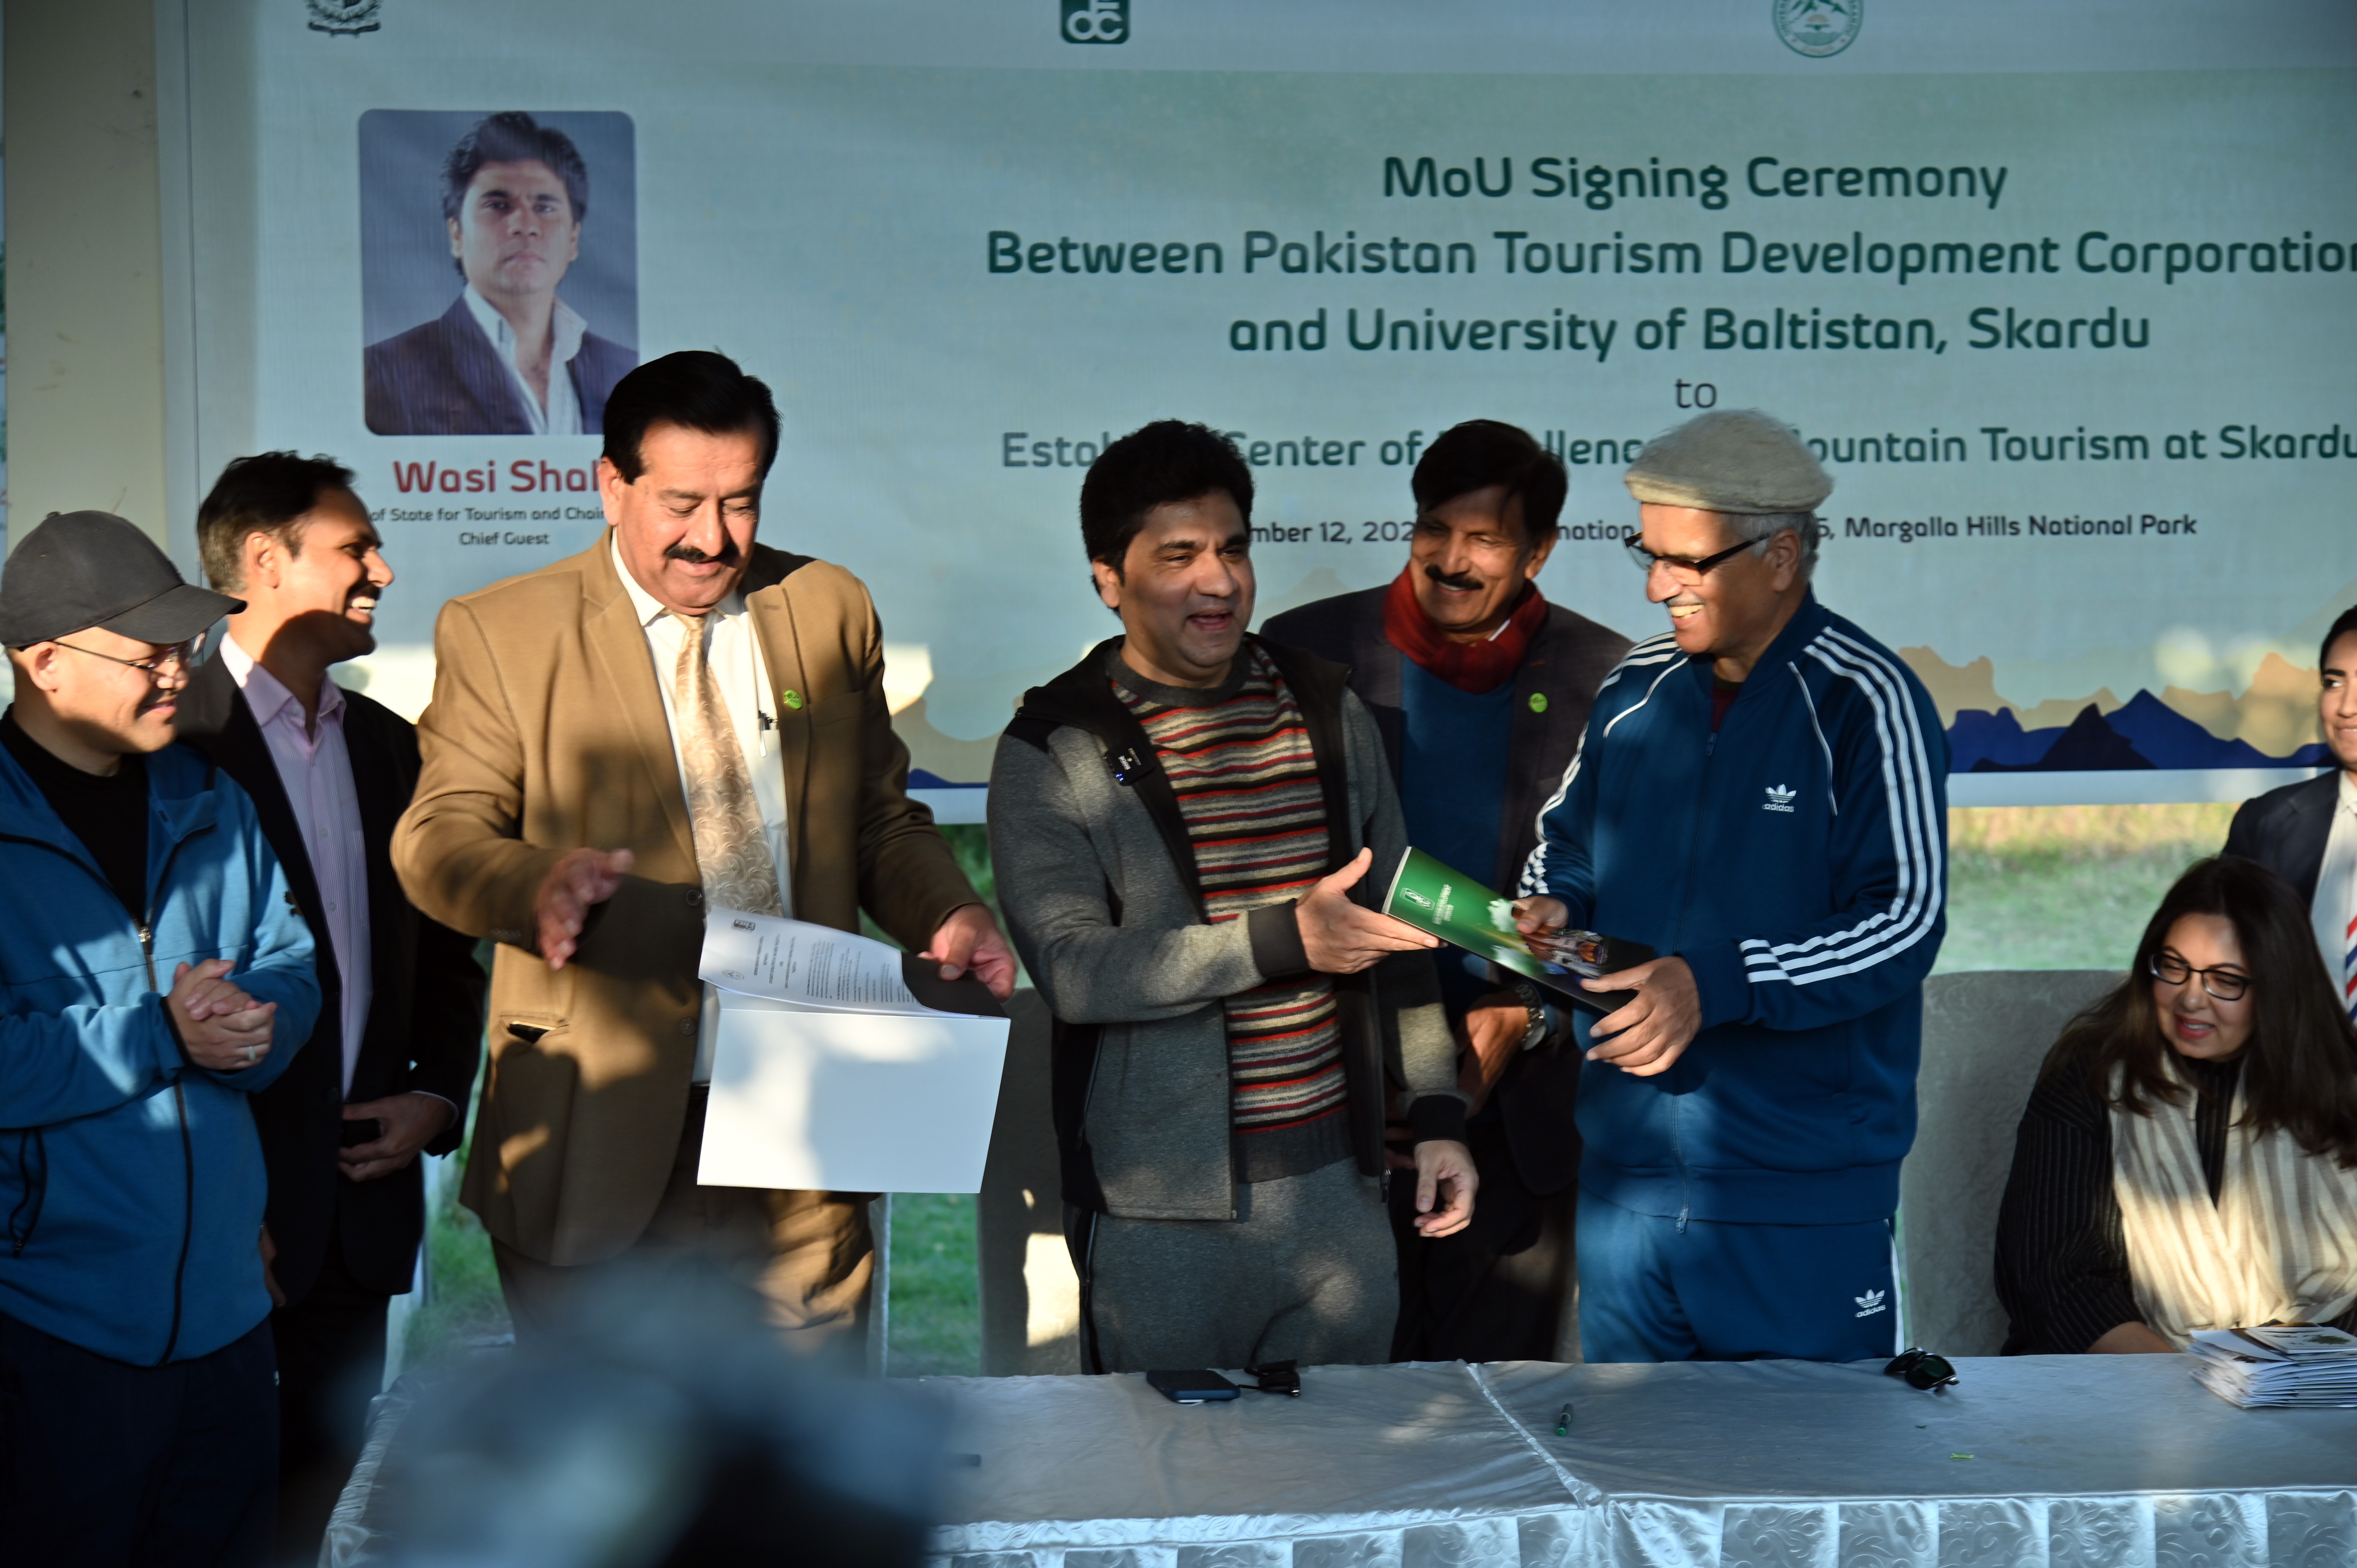 MoU signing Ceremony between Pakistan Tourism Development Corporation and the University of Baltistan, Skardu to establish a center of Excellence for mountain tourism at Skardu